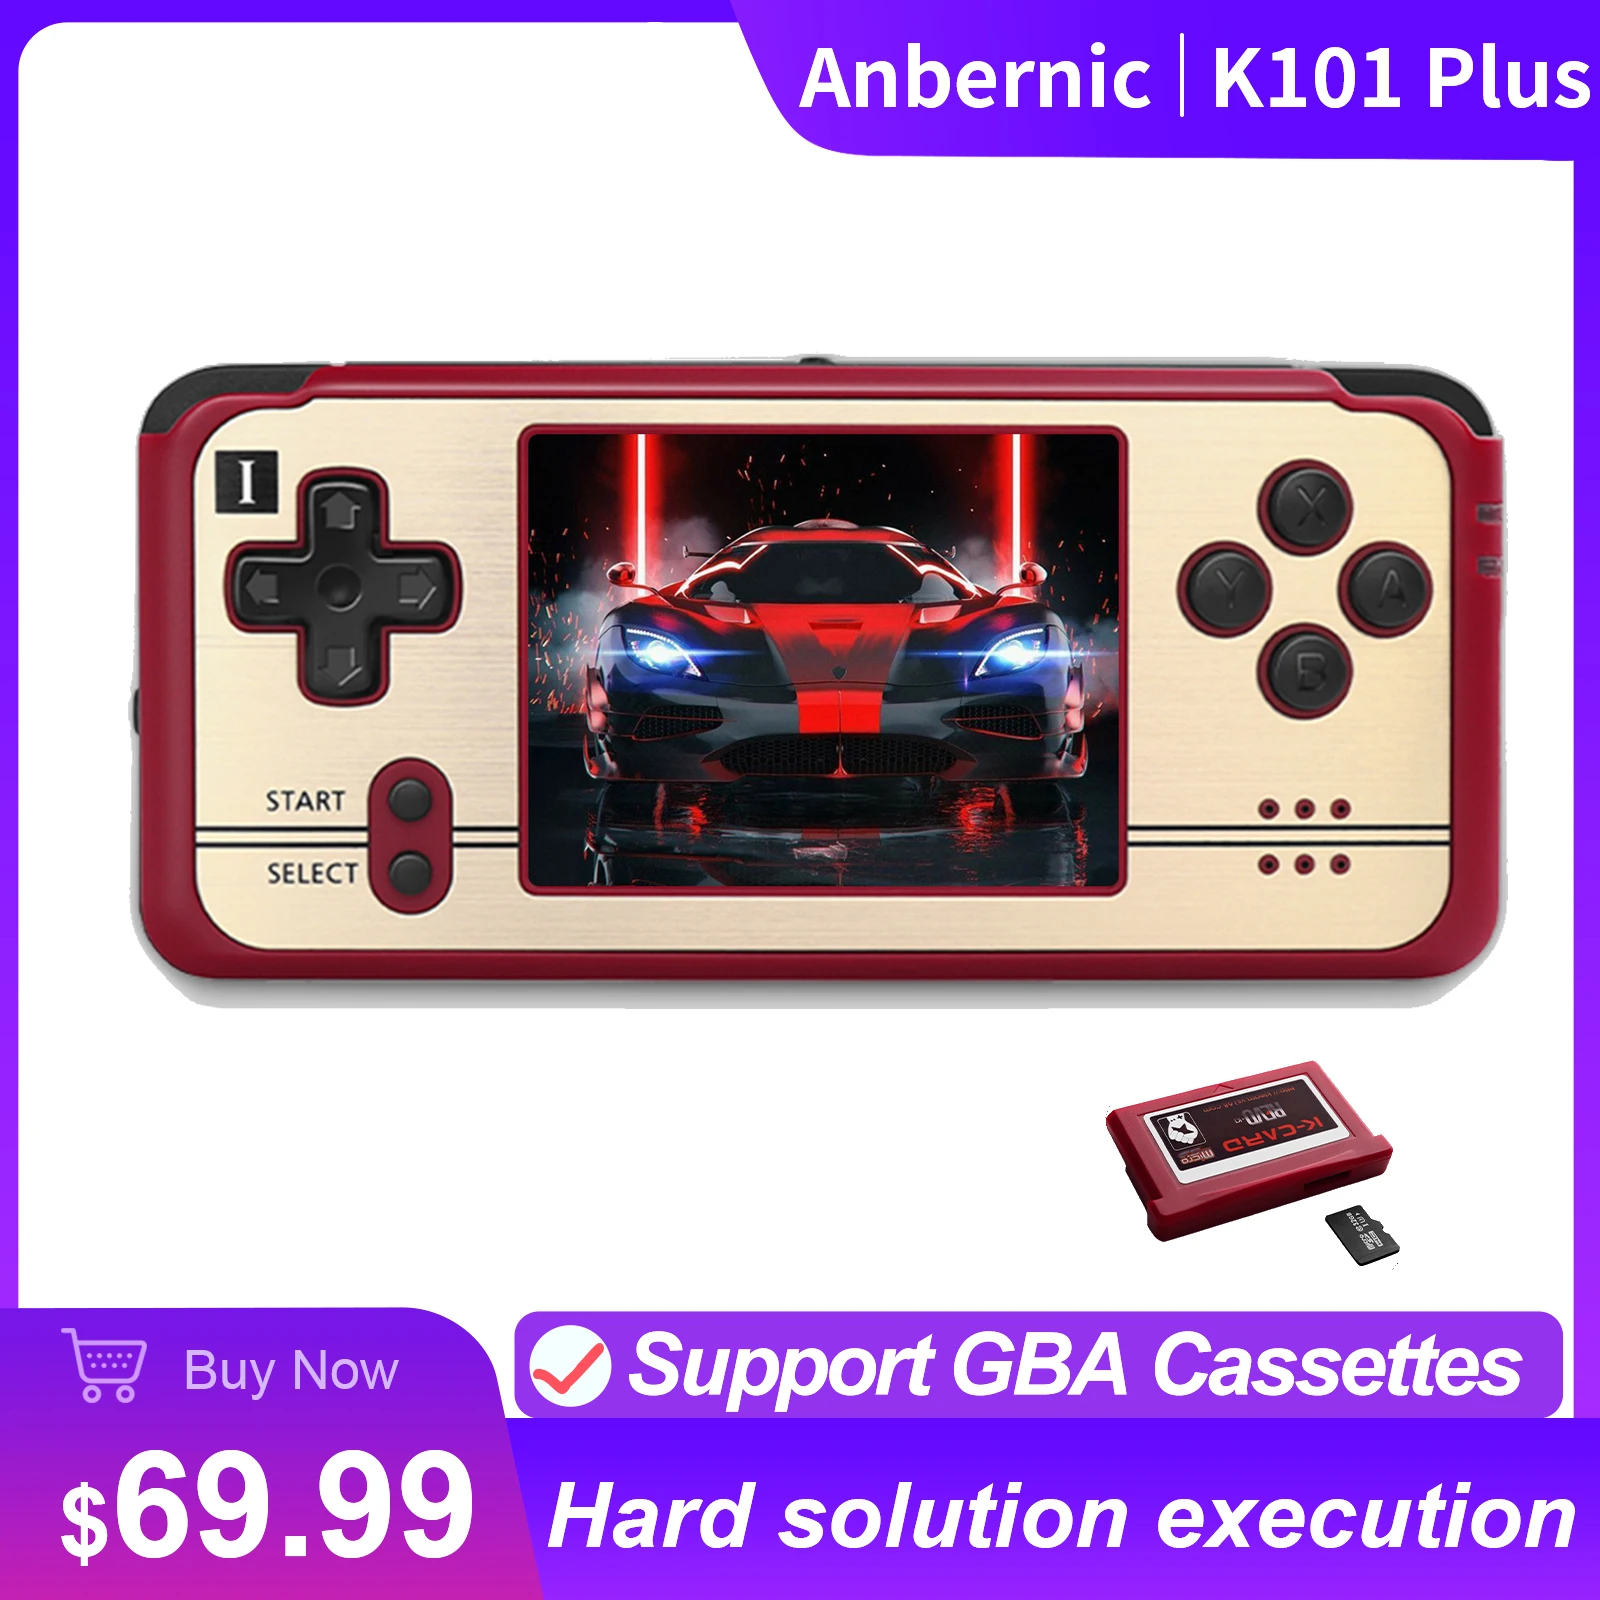 Original Anbernic K101 Plus Pocket Handheld Game Console 3 Inch TFT Screen Dual CPU Compatible with Official GBA Game Cartridges